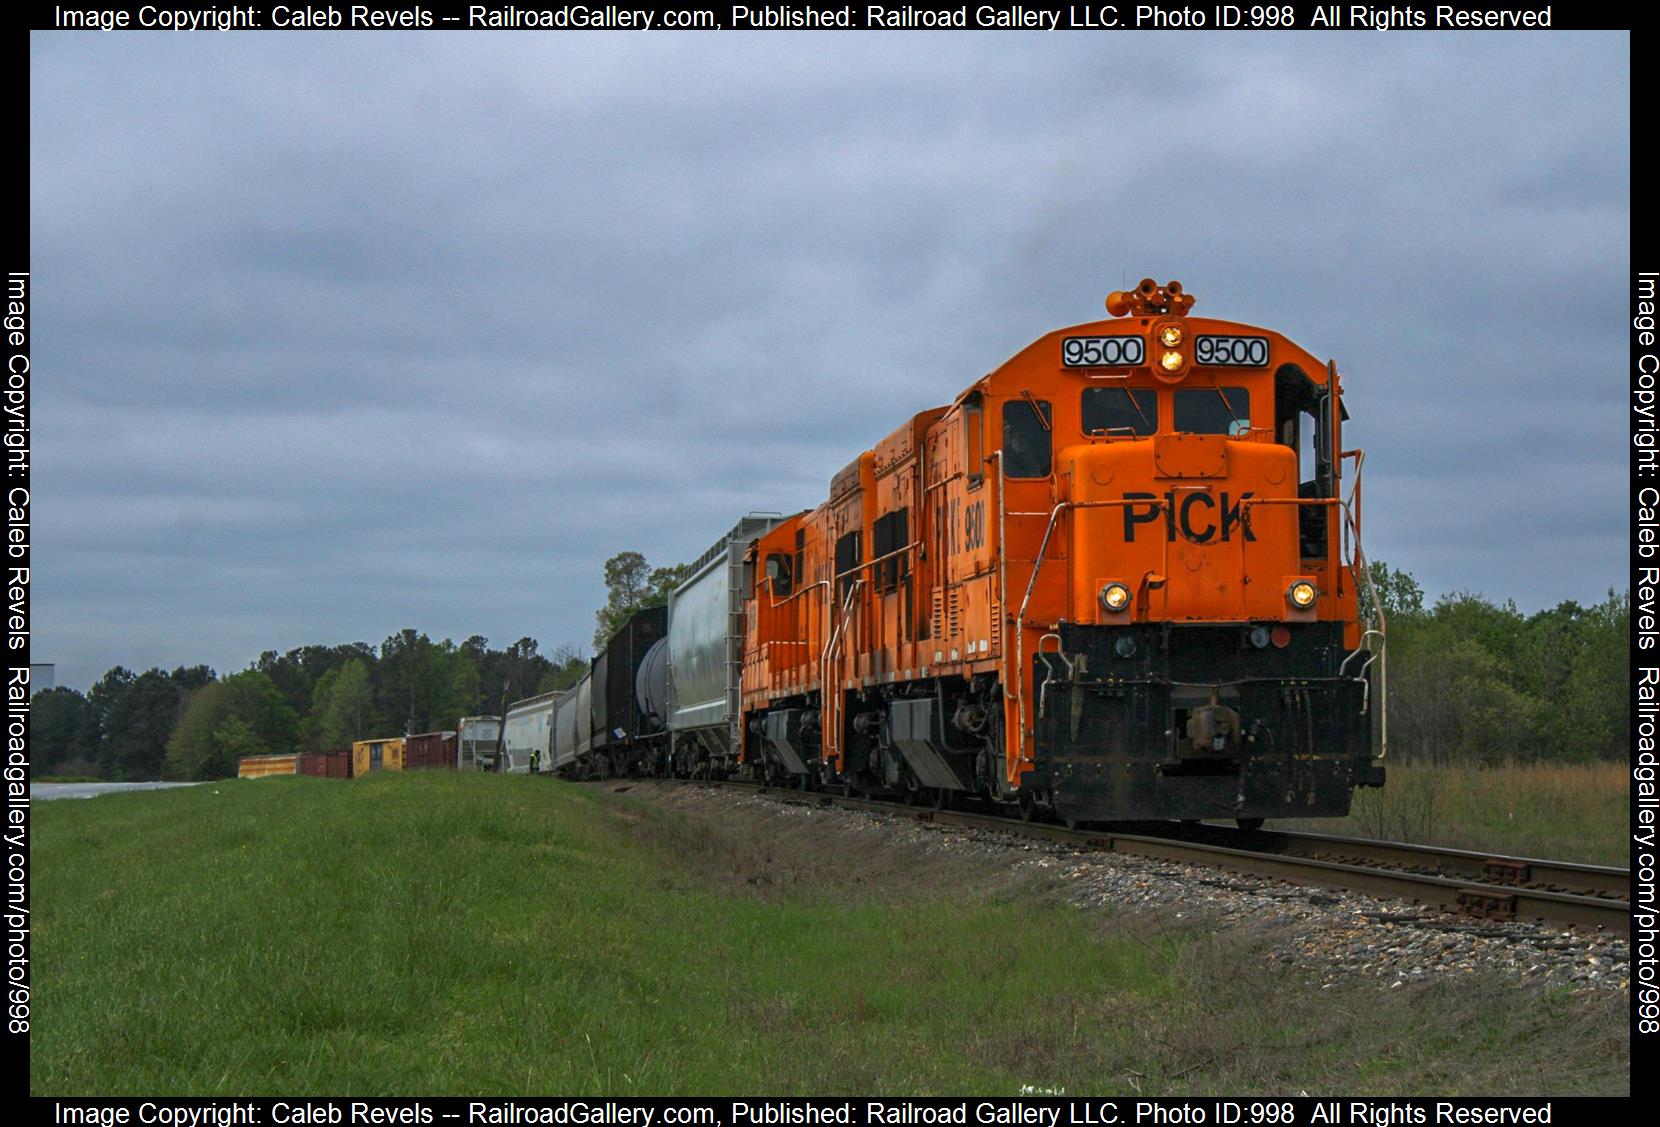 PICK 9500 is a class GE U18B and  is pictured in Gluck, South Carolina, USA.  This was taken along the Pickens Railway Gluck Branch on the Pickens Railway. Photo Copyright: Caleb Revels uploaded to Railroad Gallery on 04/26/2023. This photograph of PICK 9500 was taken on Tuesday, April 04, 2023. All Rights Reserved. 